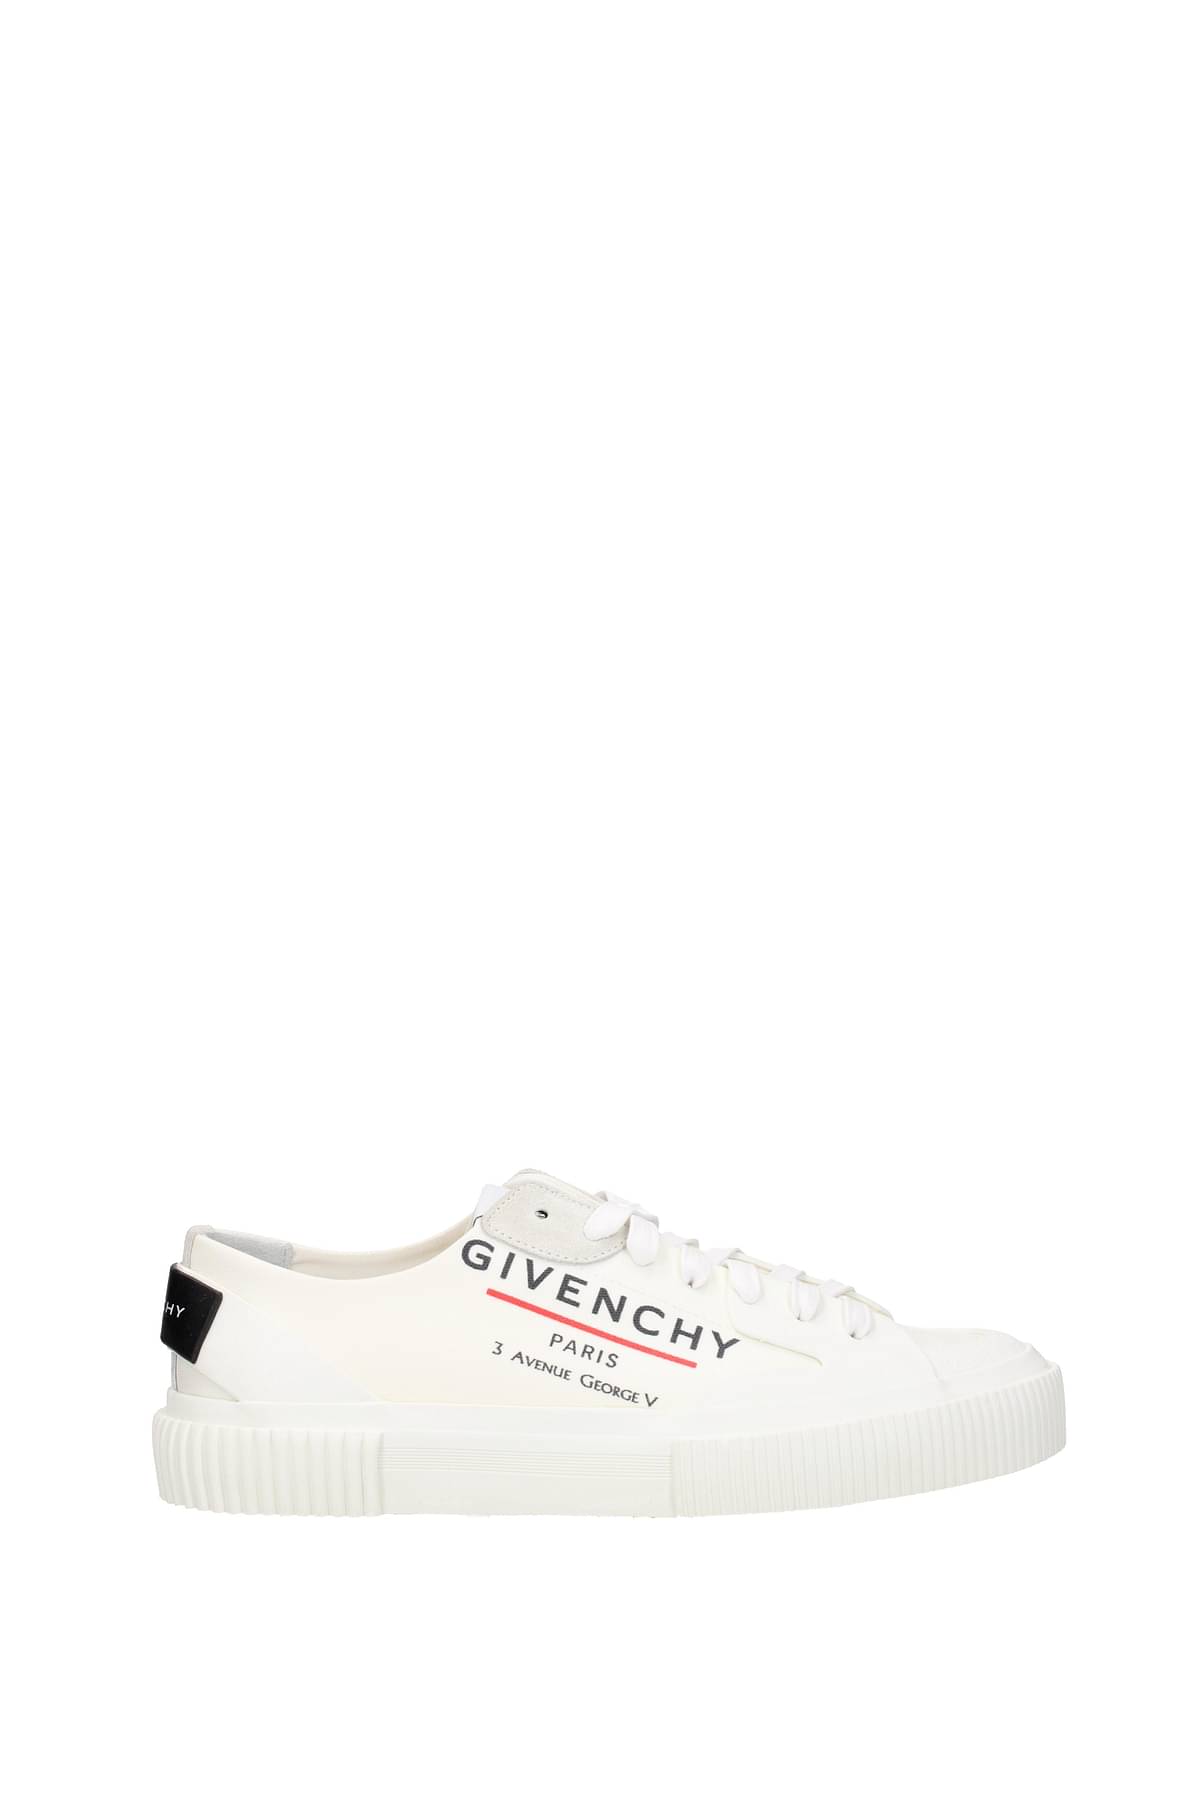 Givenchy Sneakers Men BH001TH0L9100 Fabric Beige Off White 259,88€